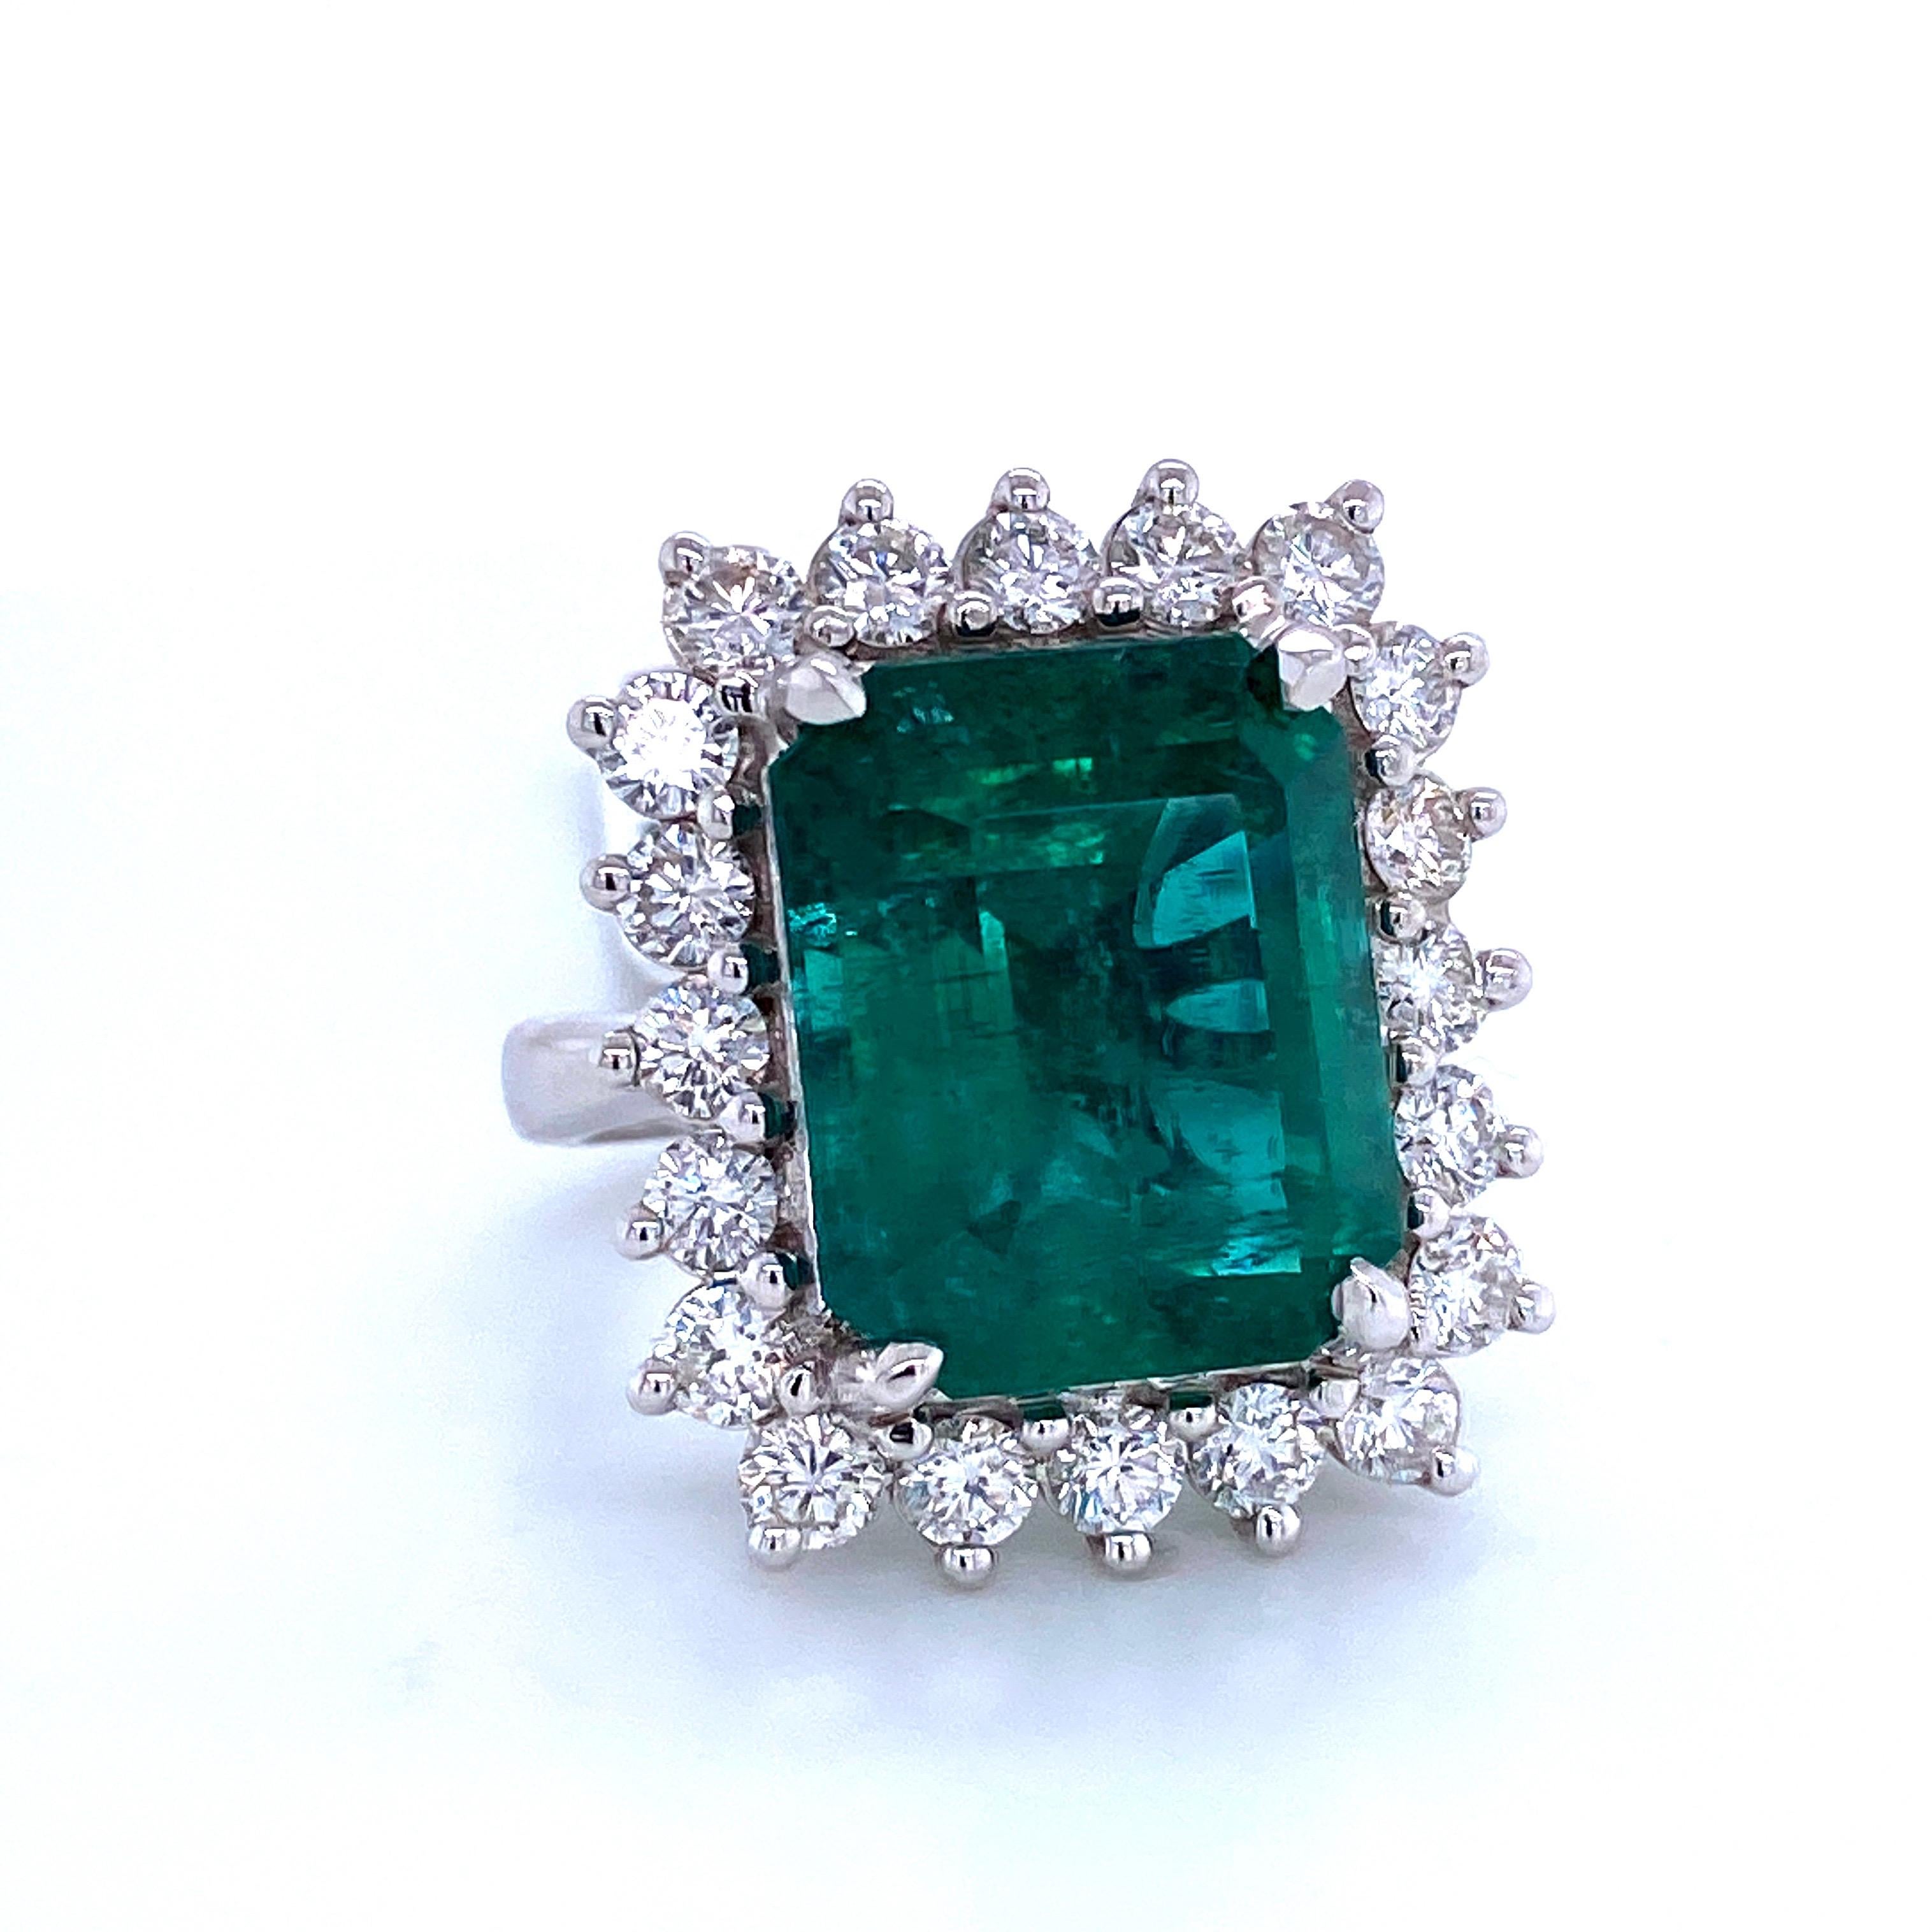 18K White gold cocktail ring featuring one green emerald cut Emerald weighing 12.35 carats flanked with 20 round brilliants weighing 2.10 carats,
